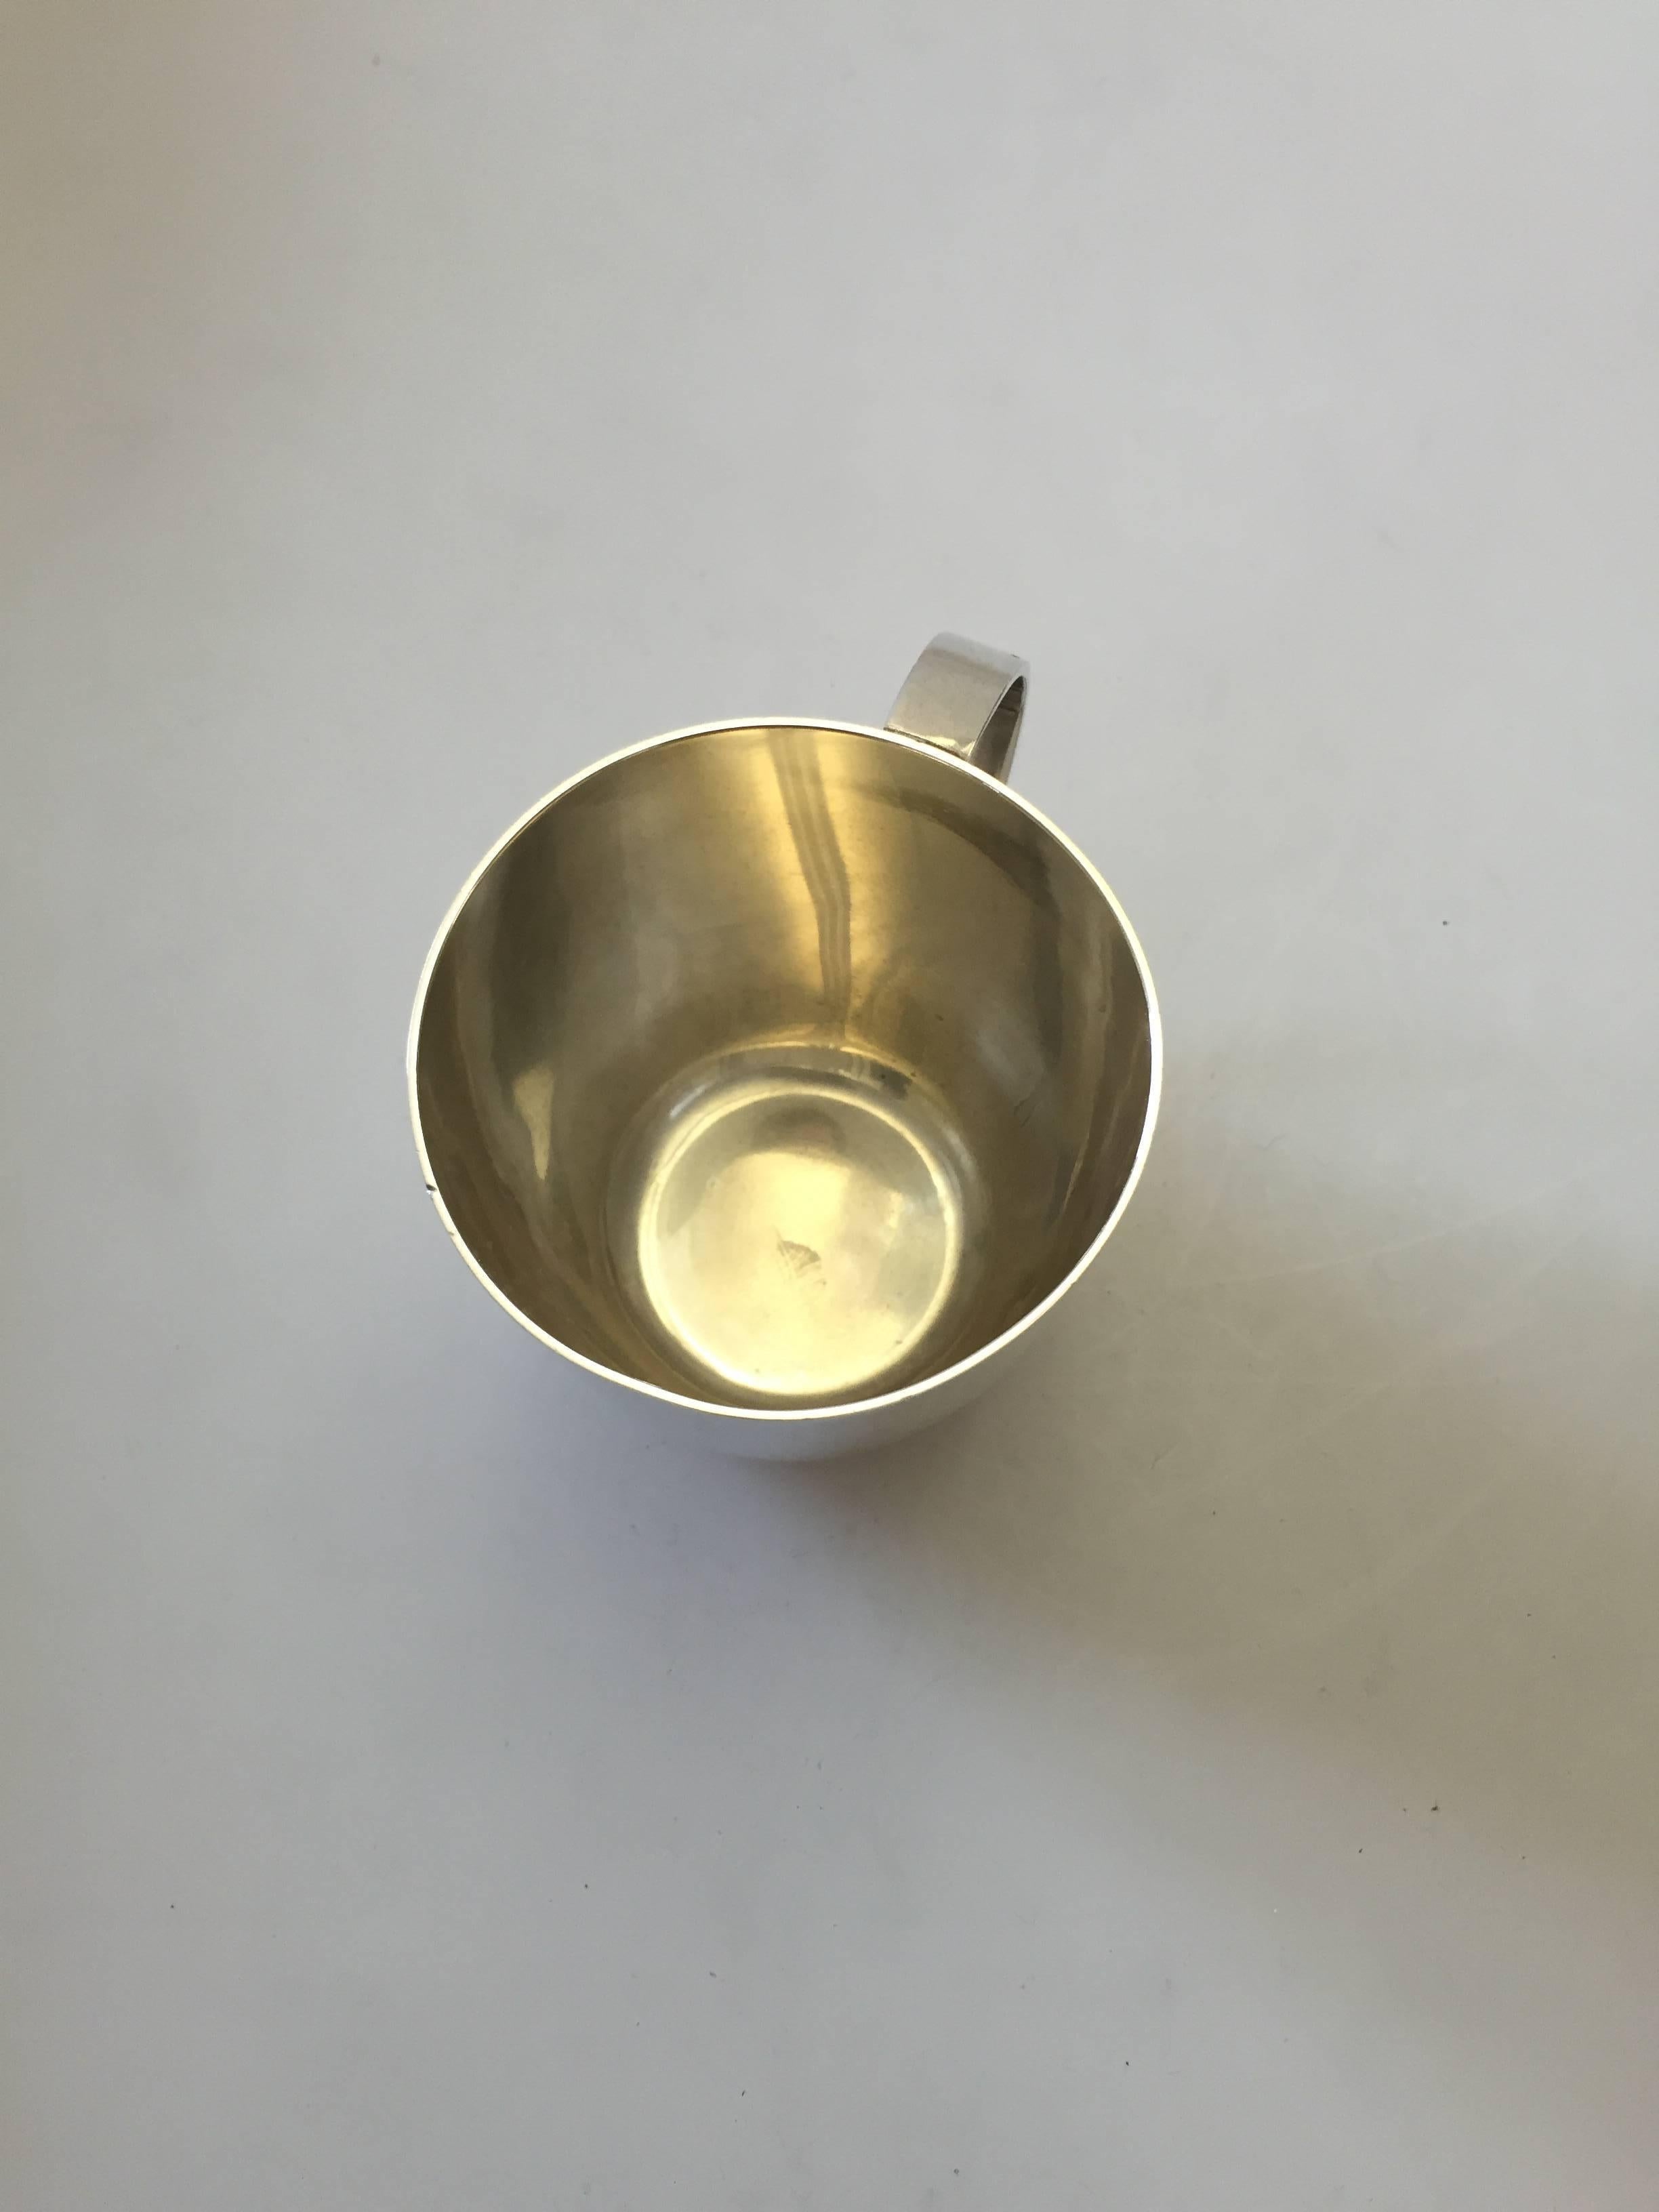 Georg Jensen sterling silver cup with handle #1126. Measures 6.5 cm / 2 3/5